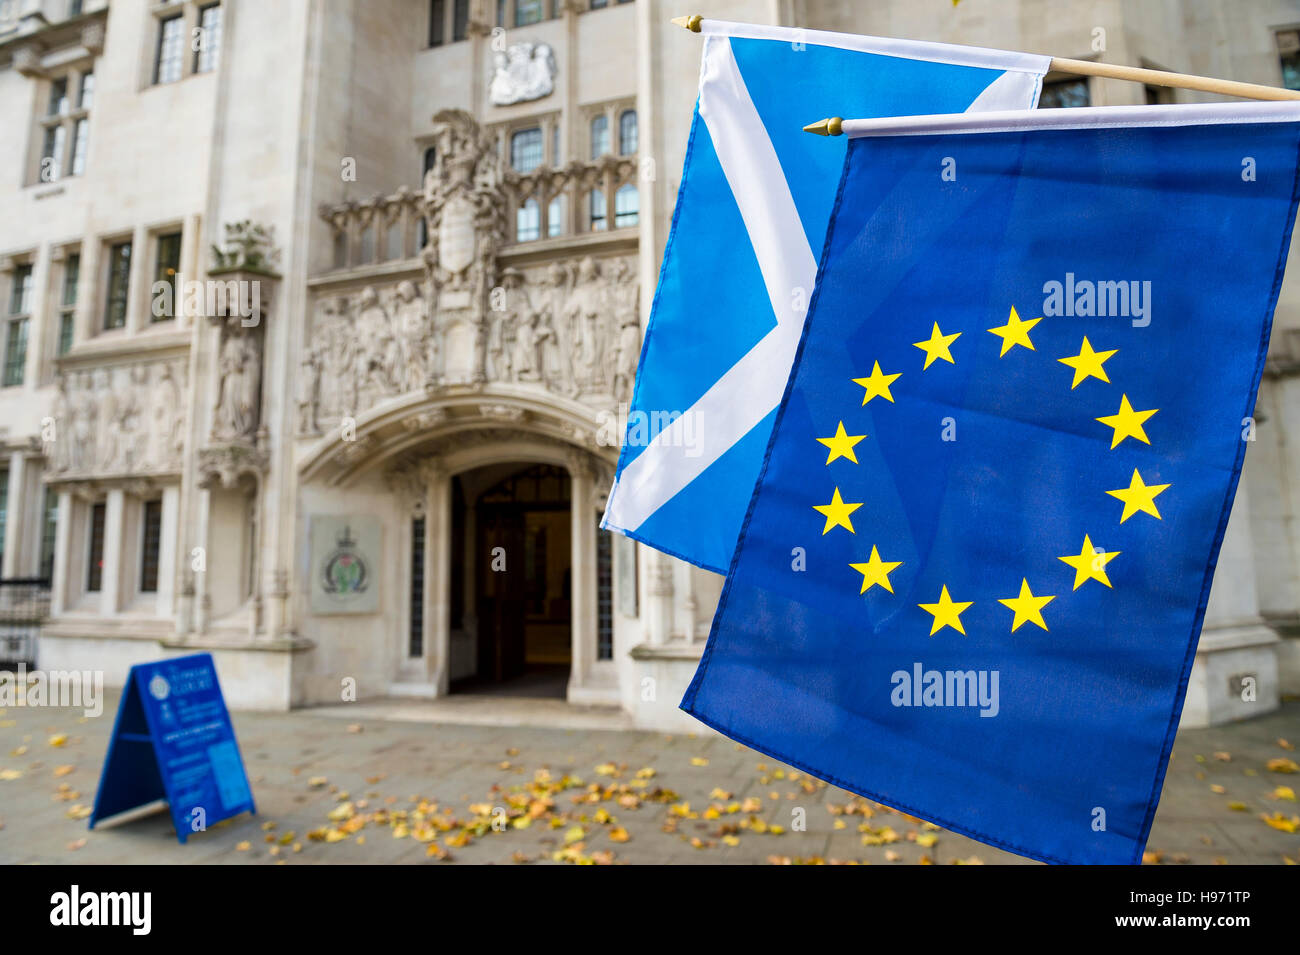 European Union and Scottish flags flying at The Supreme Court of the United Kingdom in the Middlesex Guildhall building London Stock Photo